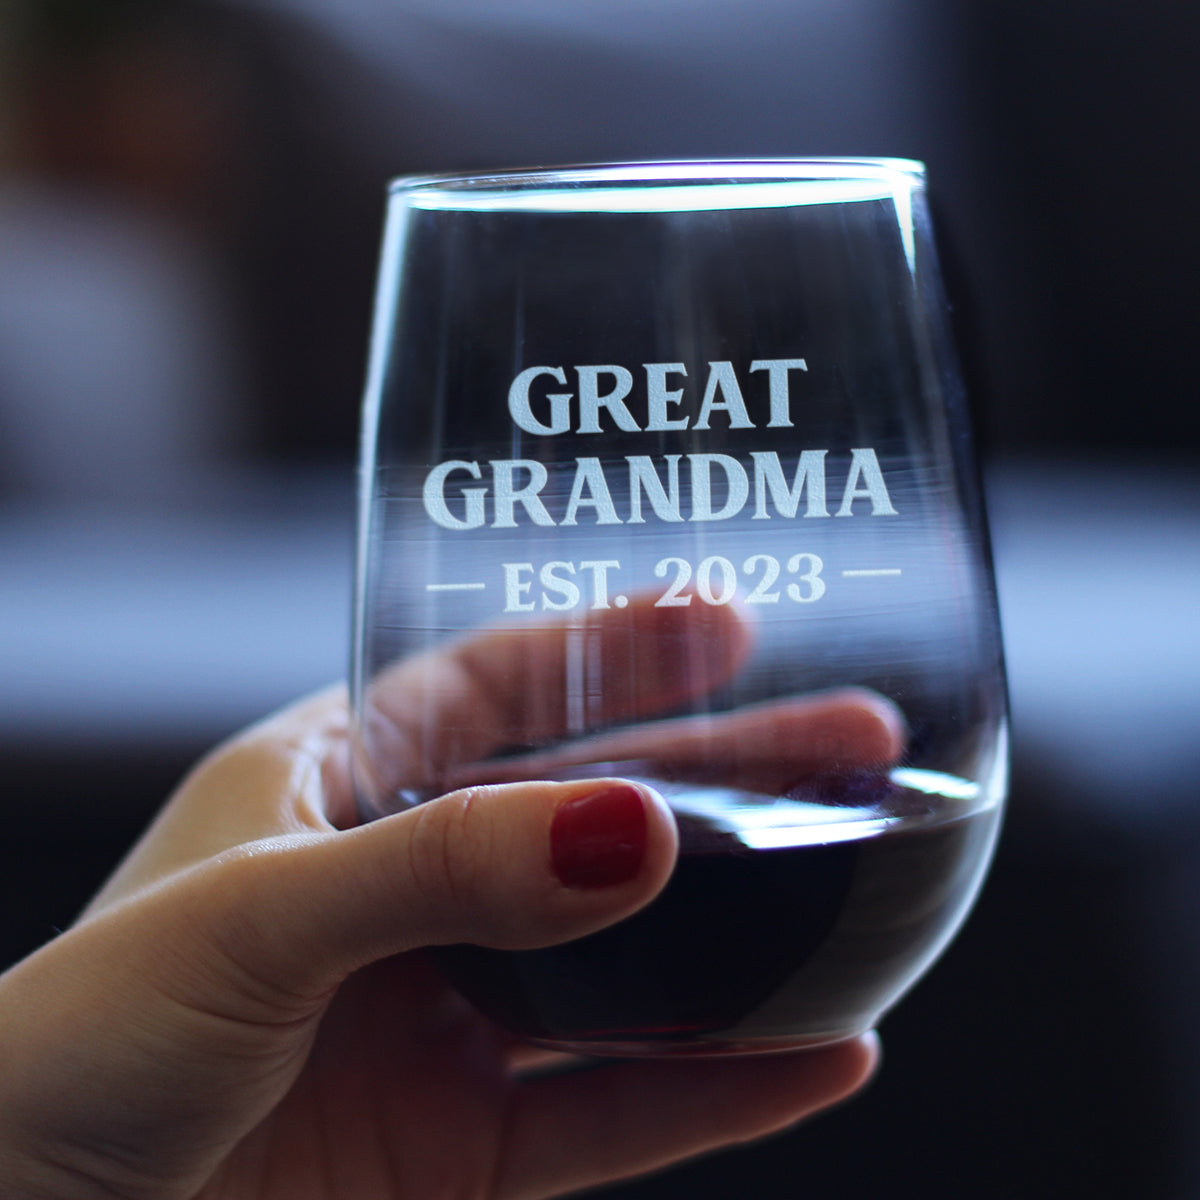 Great Grandma Est 2023 - New Great Grandmother Stemless Wine Glass Gift for First Time Great Grandparents - Bold 17 Oz Large Glasses